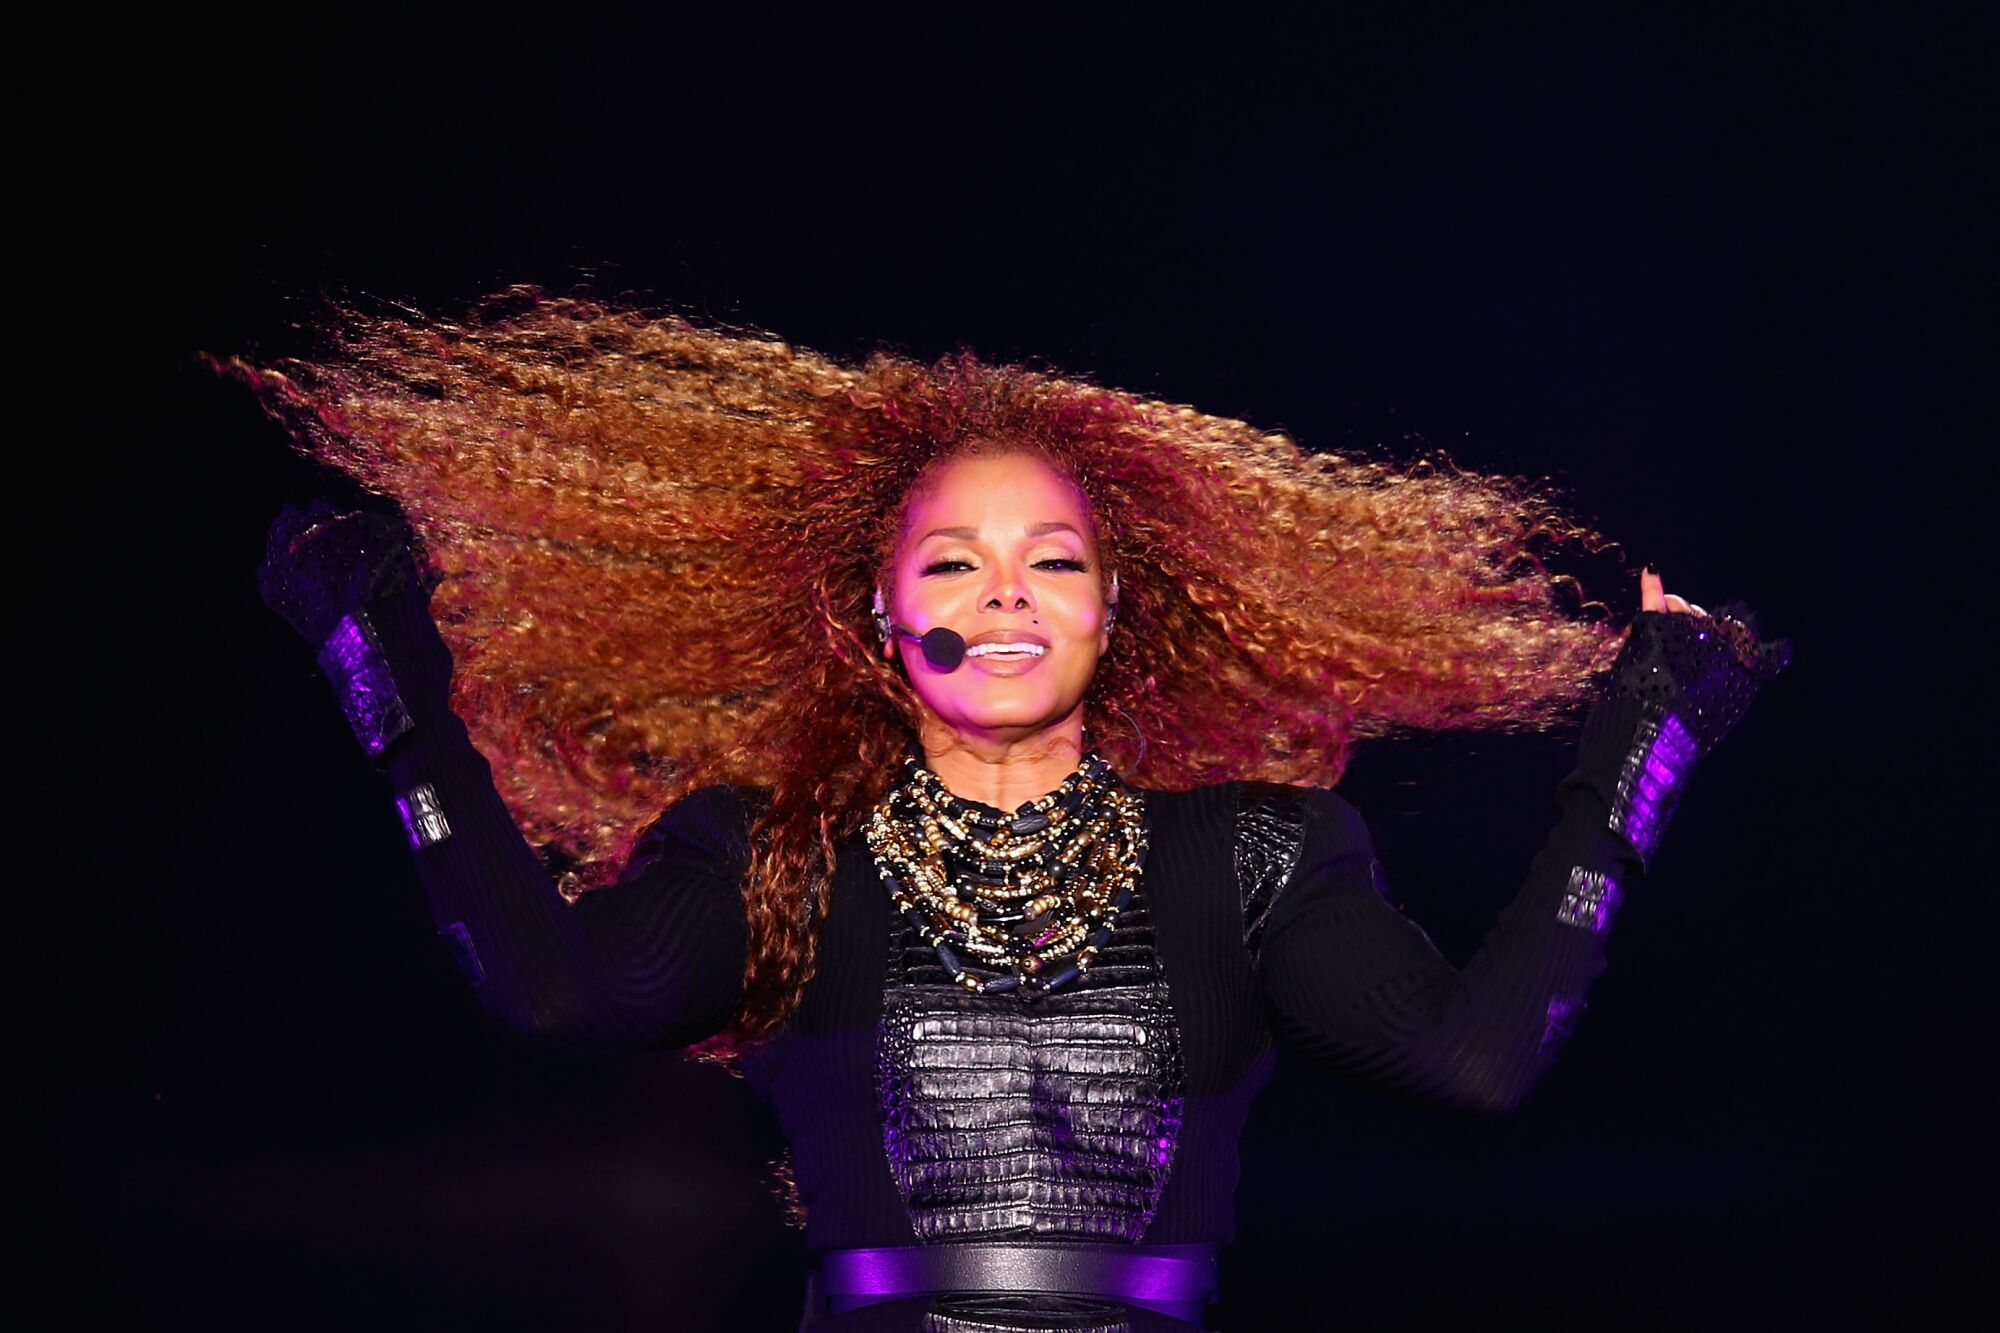 A woman with long red hair performs onstage